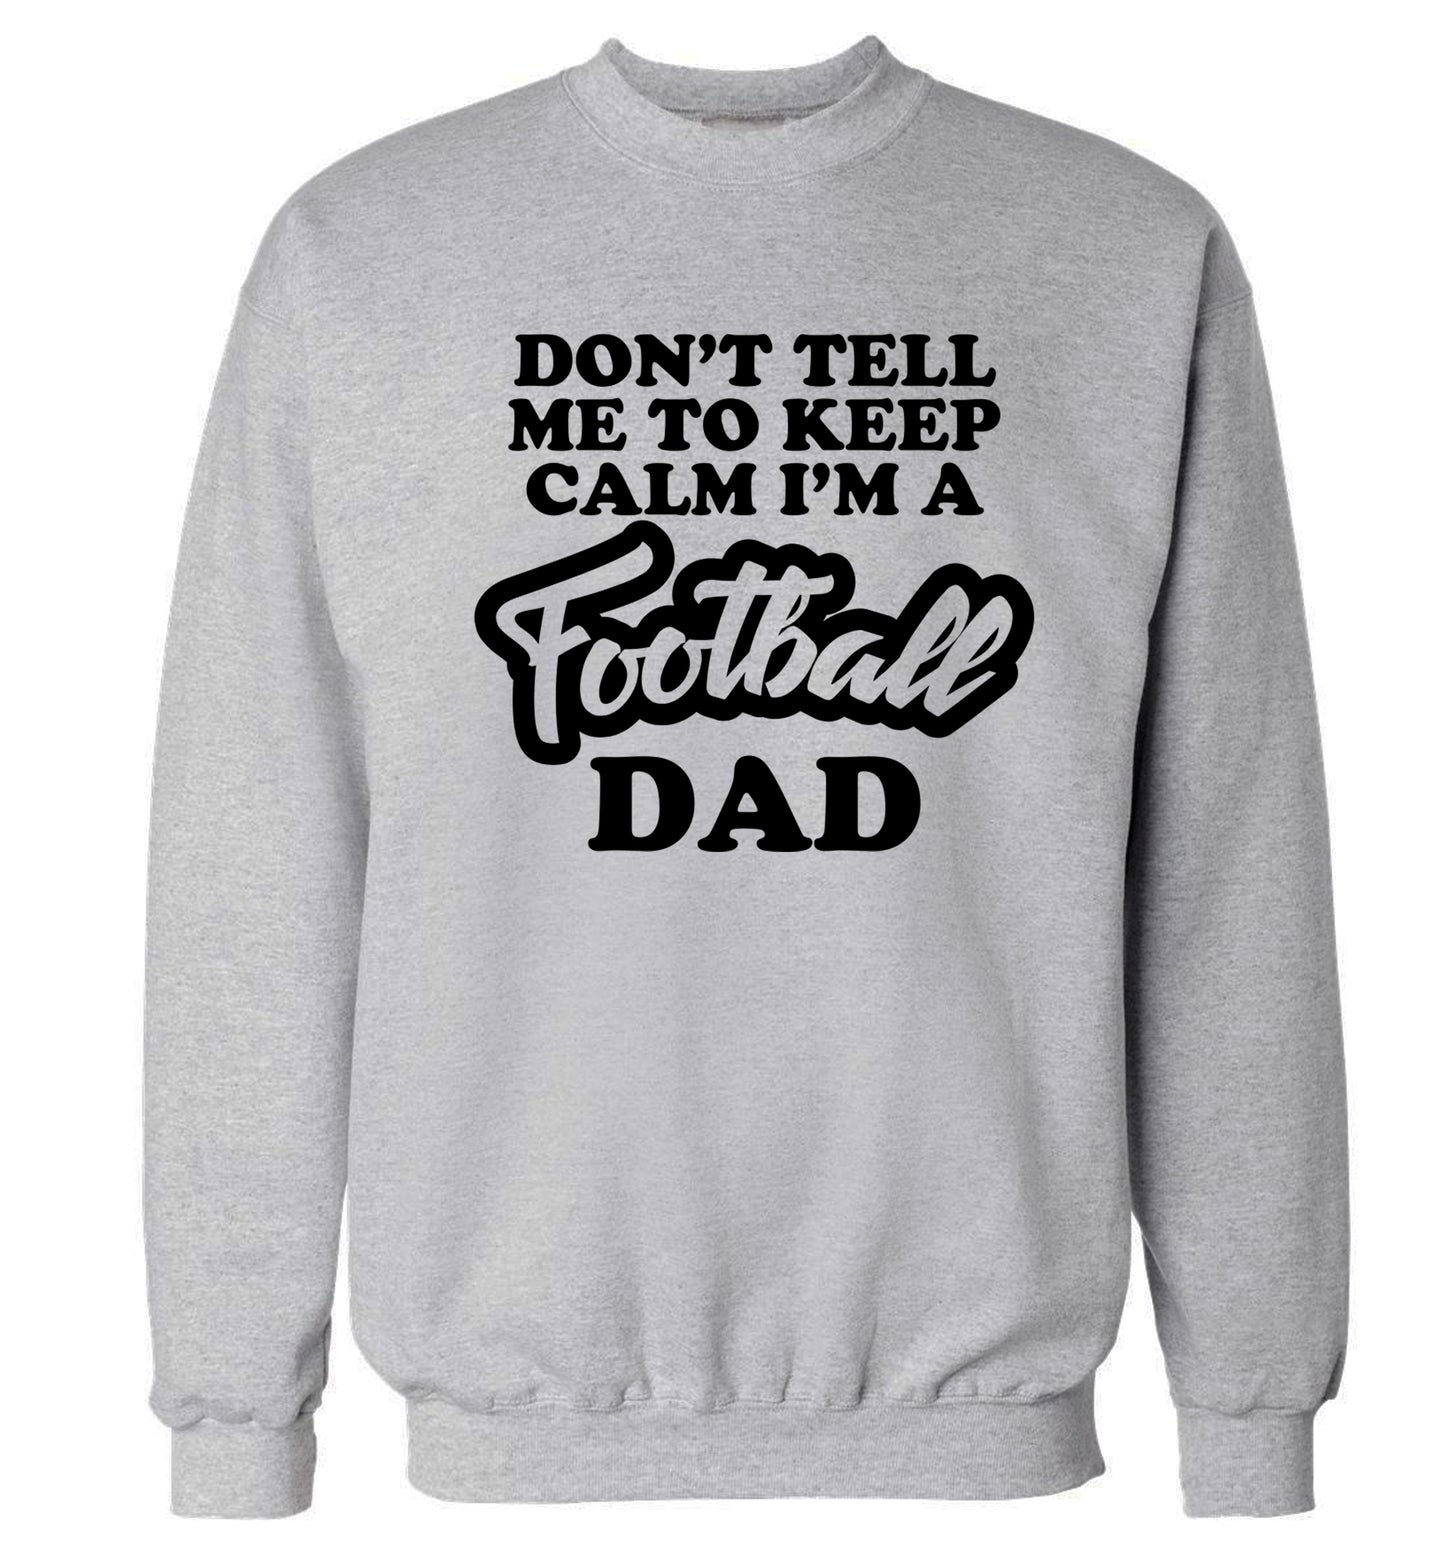 Don't tell me to keep calm I'm a football grandad Adult's unisexgrey Sweater 2XL